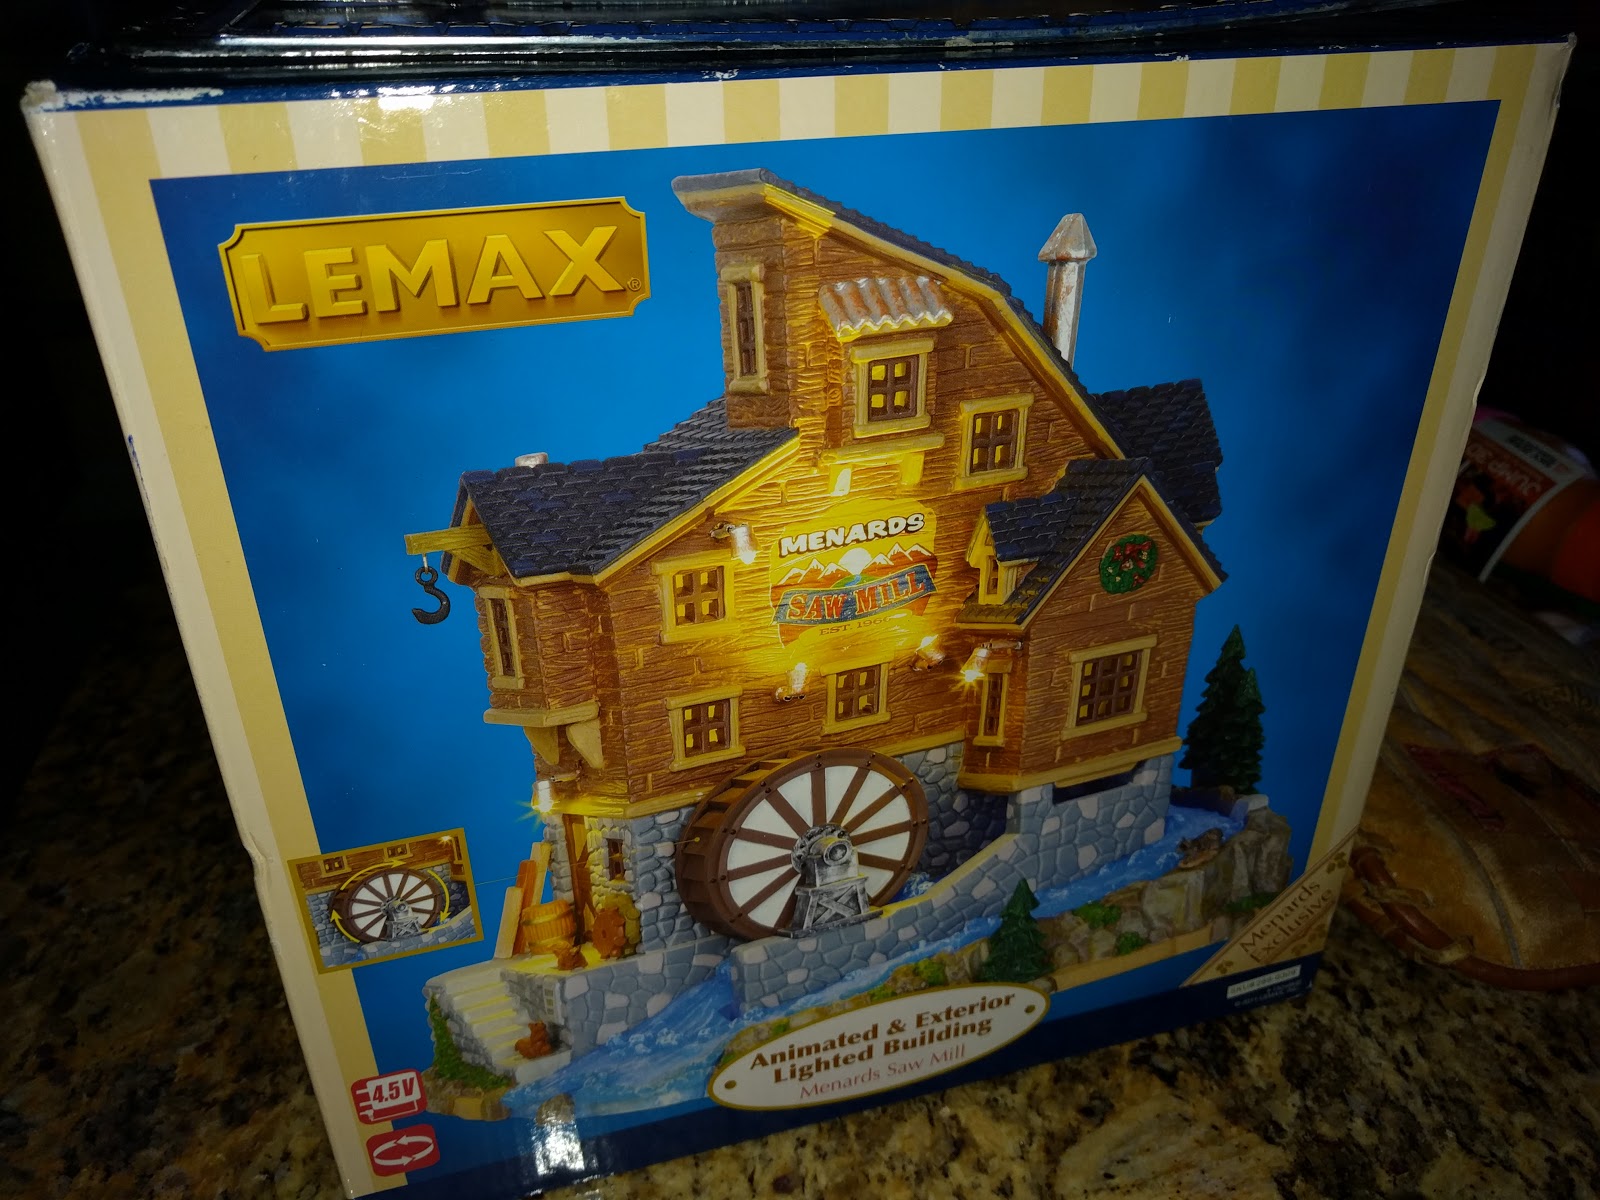 Found In My Old Trunk - Lemax Animated Saw Mill Building